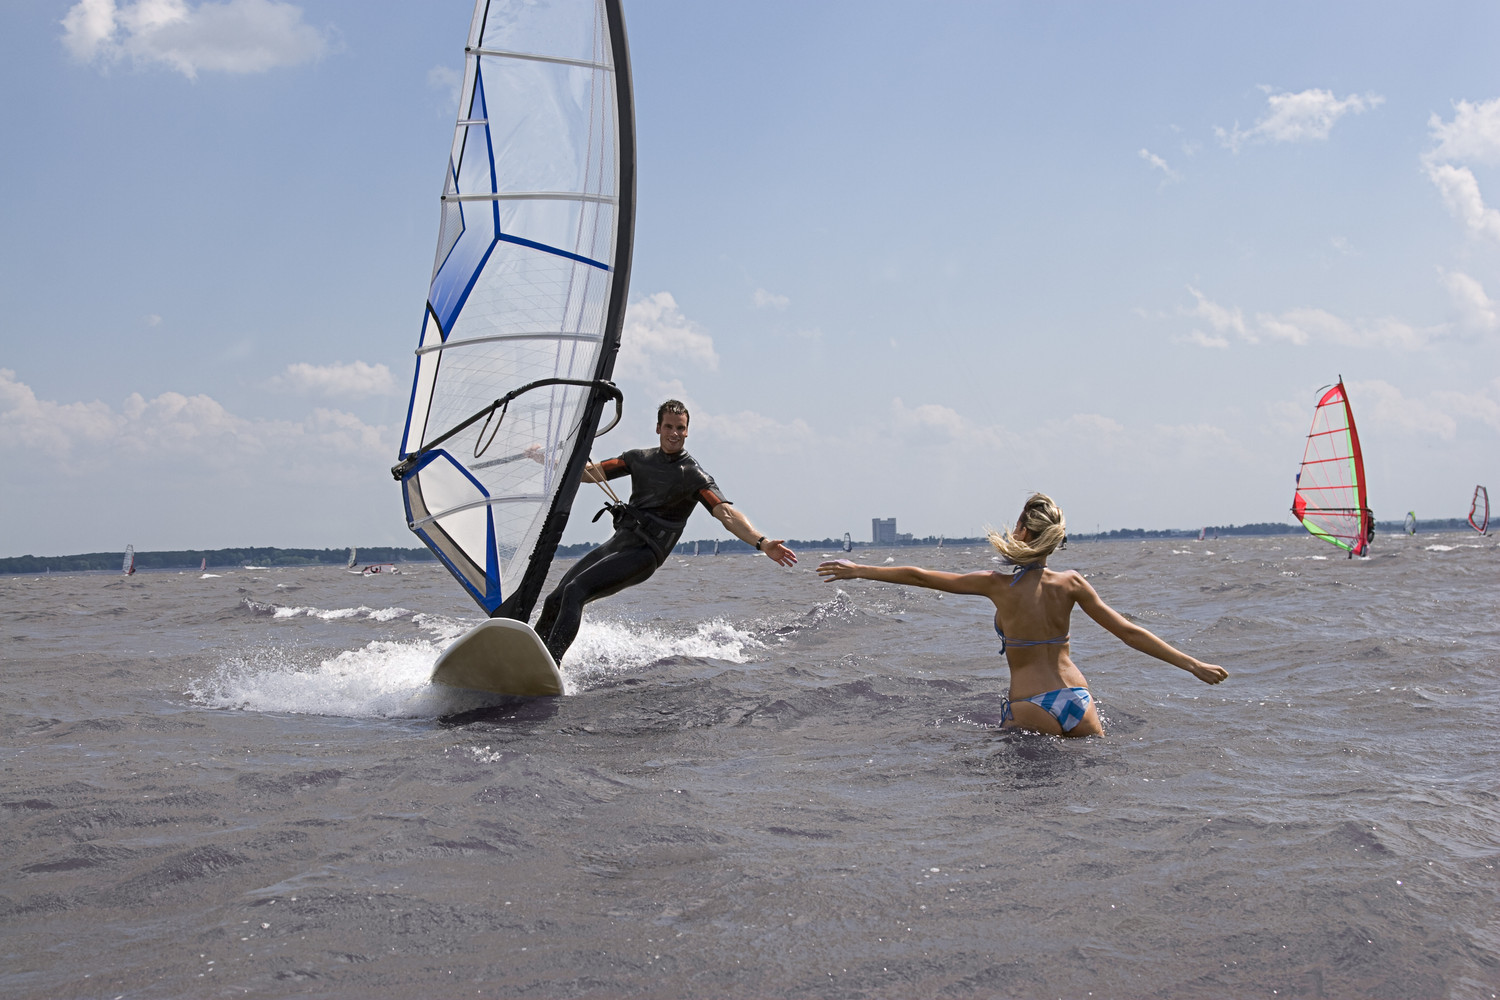 Try Your Hand At Windsurfing

